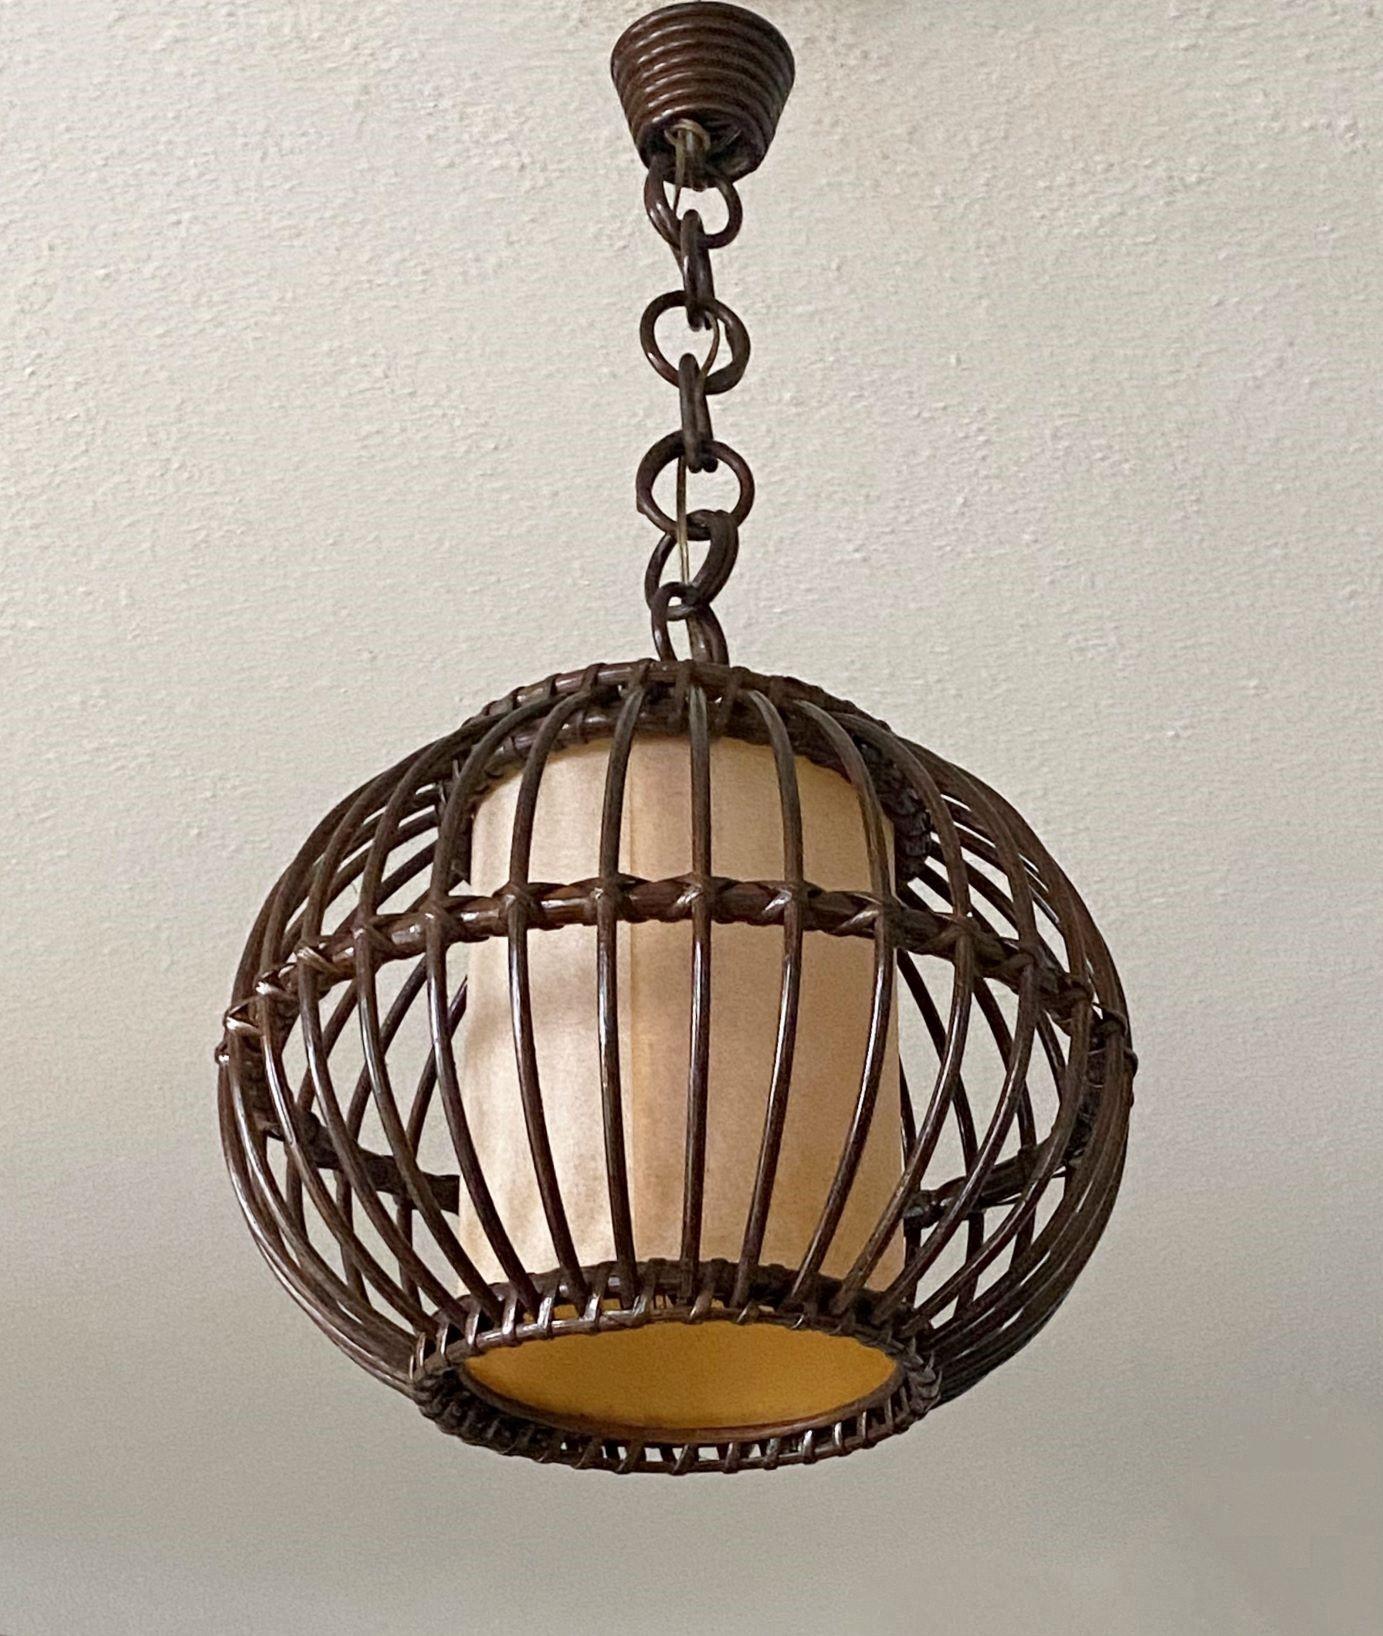 Spanish Handcrafted Rattan Wicker Globe Pendant with Perchament Lamp Shade, Spain, 1950s For Sale